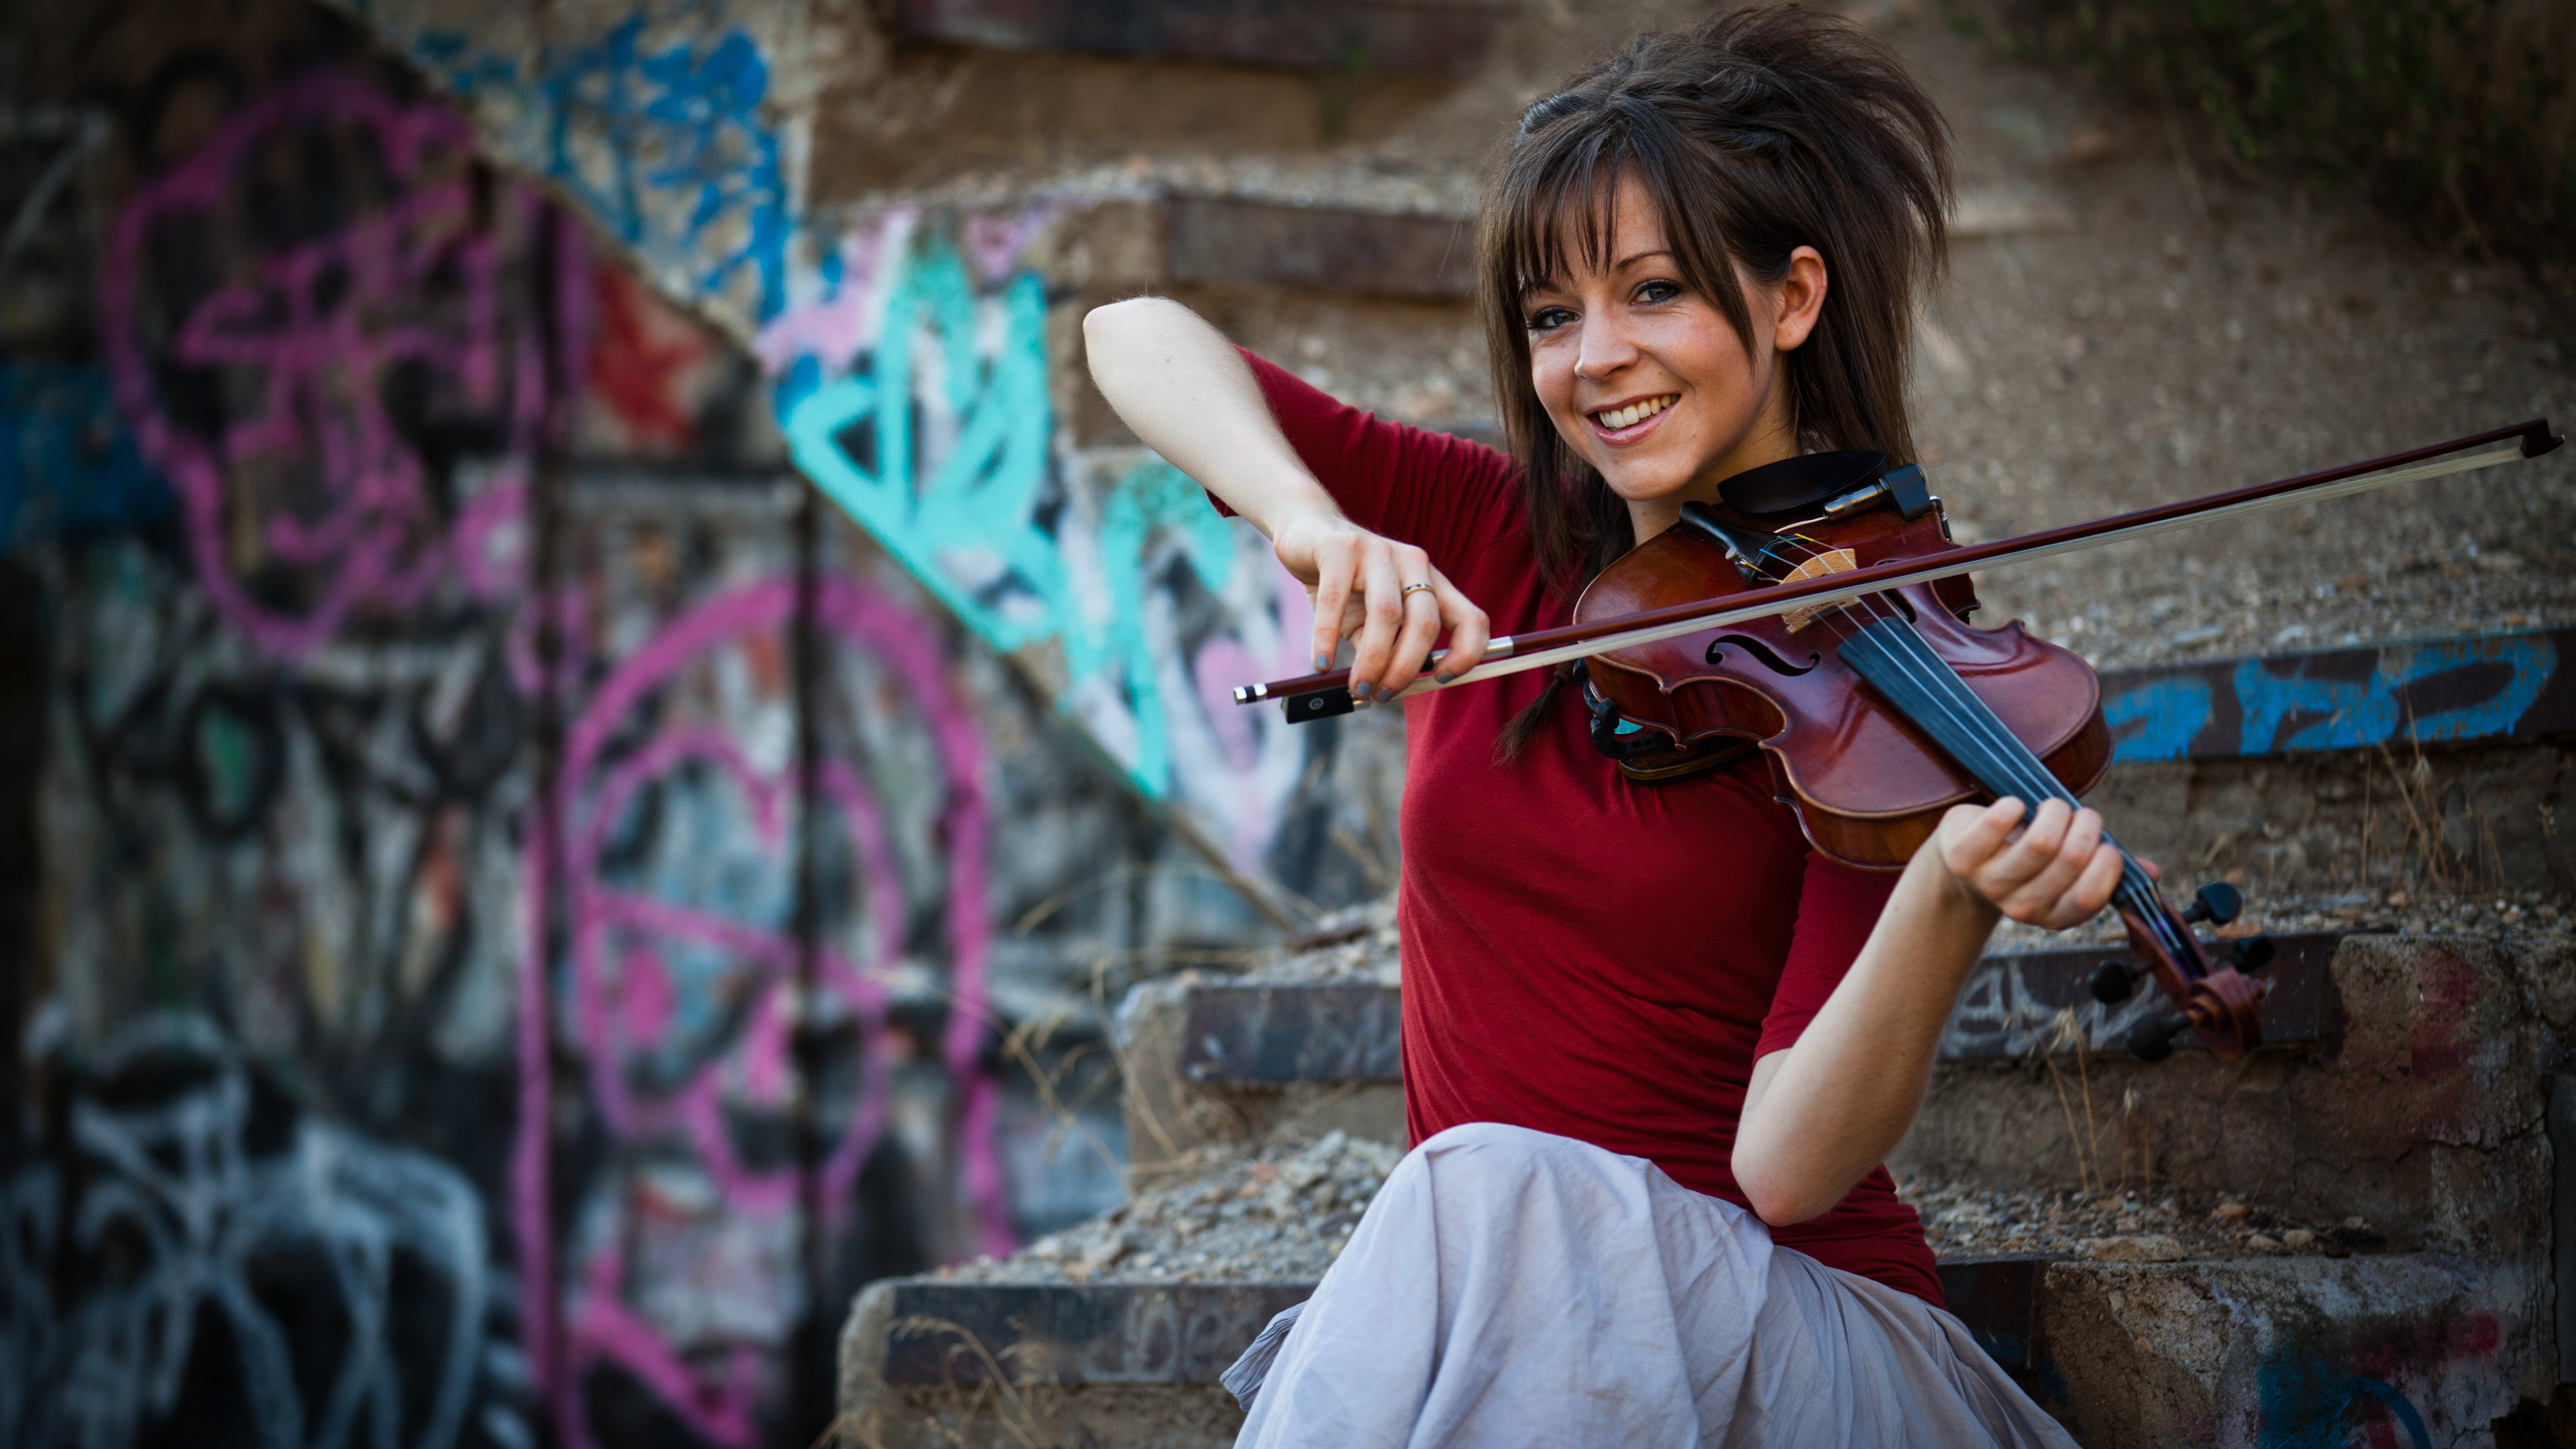 Lindsey Stirling Wallpapers Images Photos Pictures Backgrounds